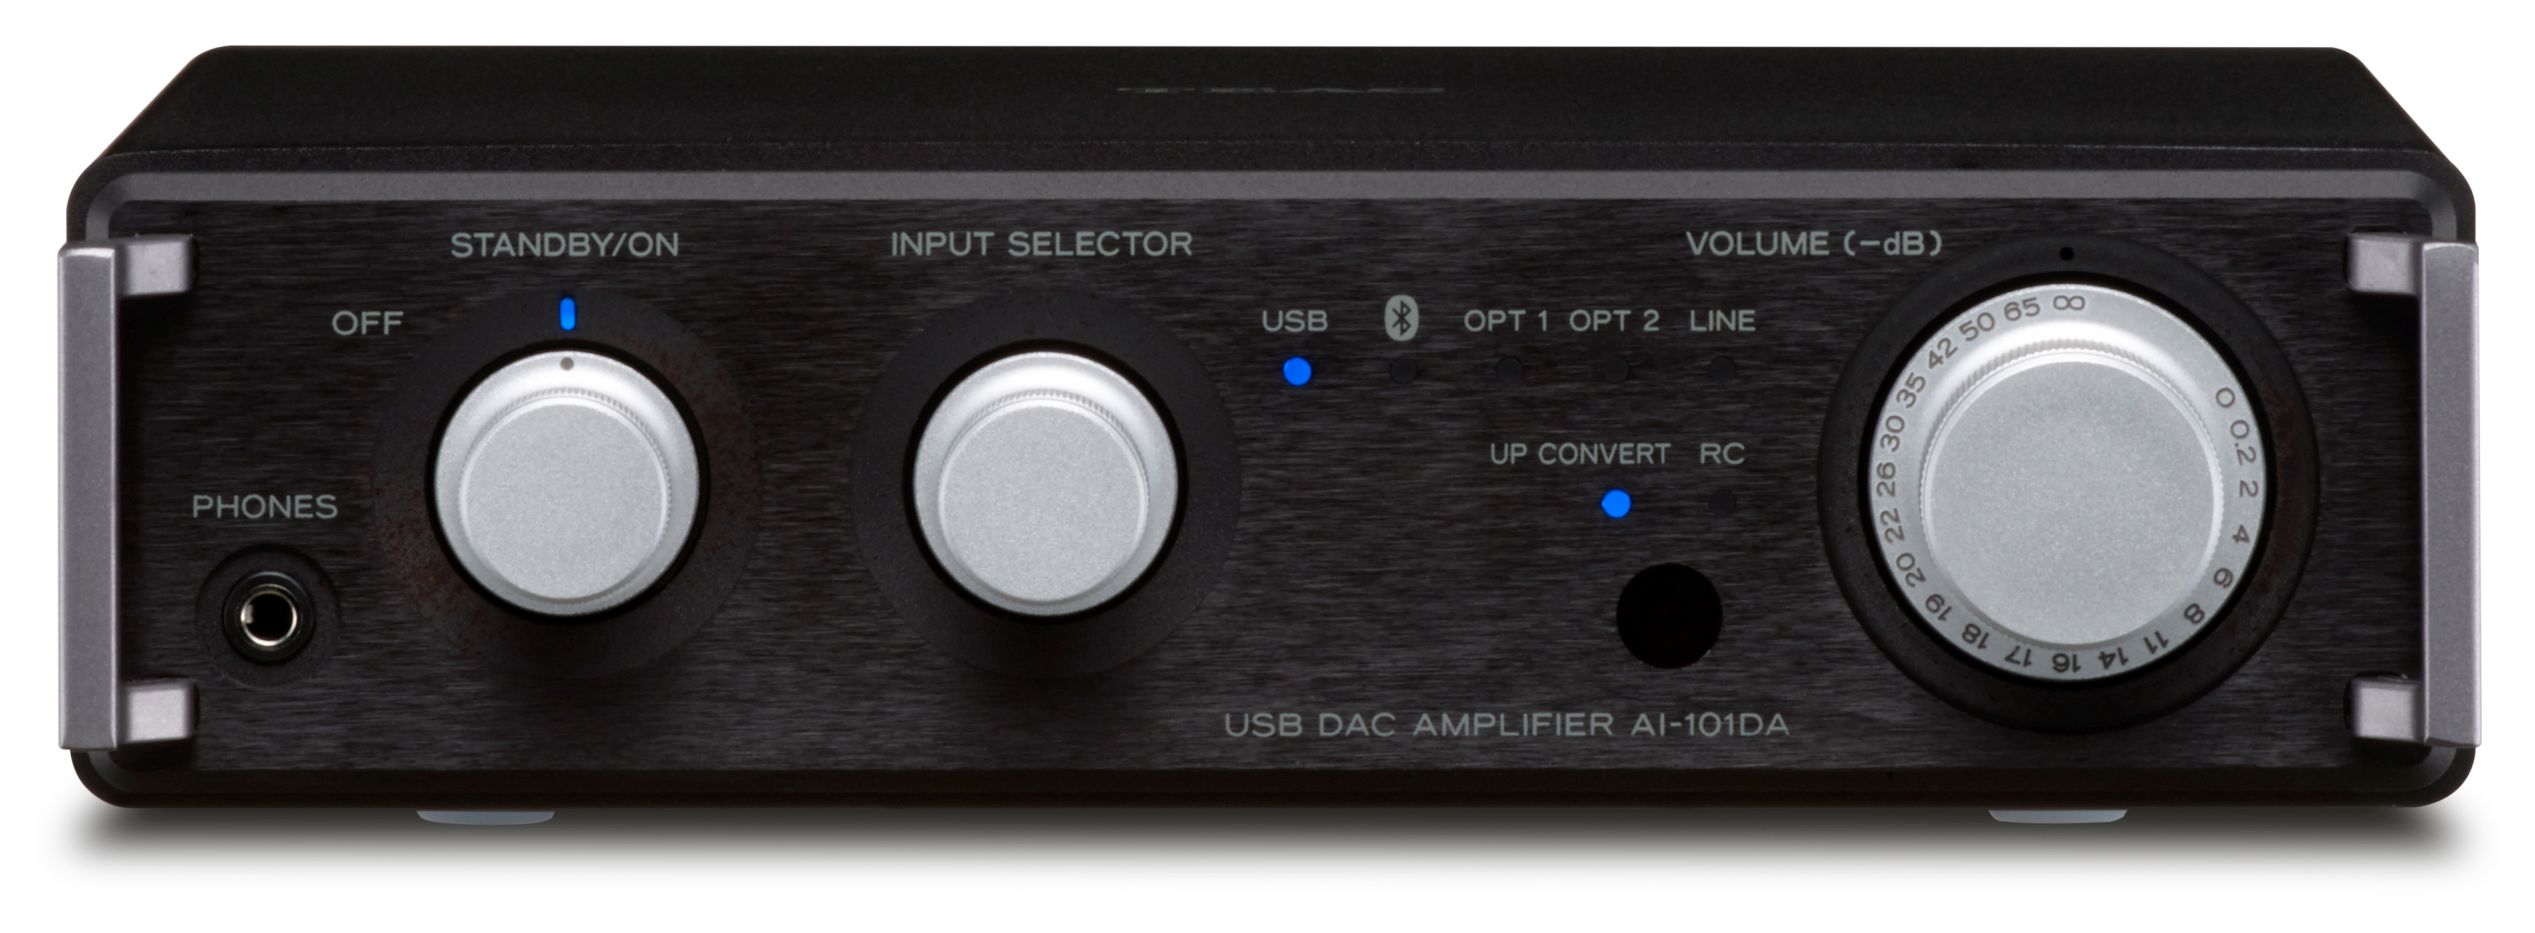 TEAC REFERENCE 101